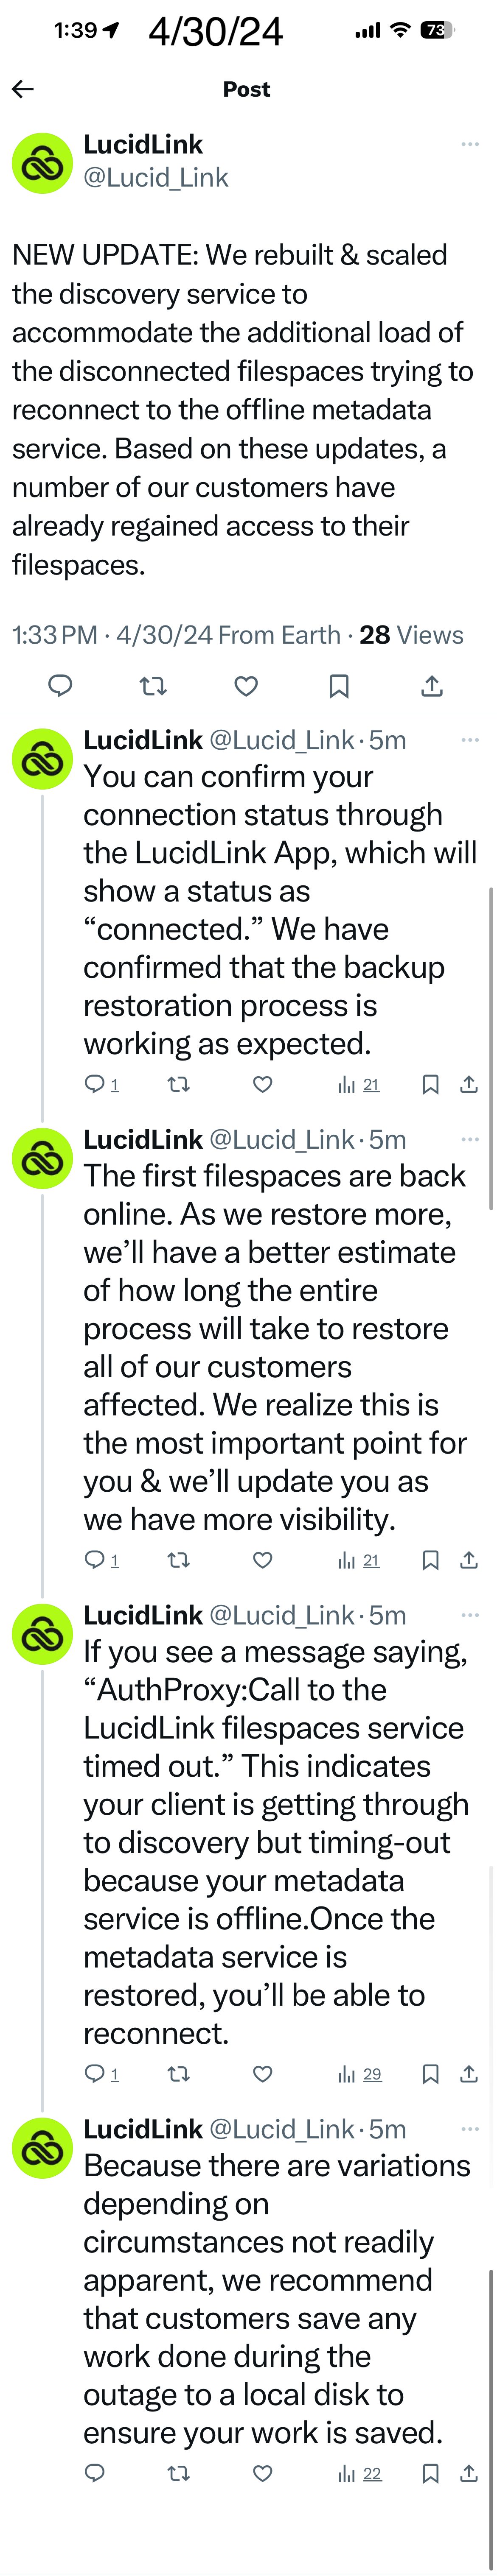 Outage hits LucidLink, updates happening throughout the day, should be coming back online for most users 7